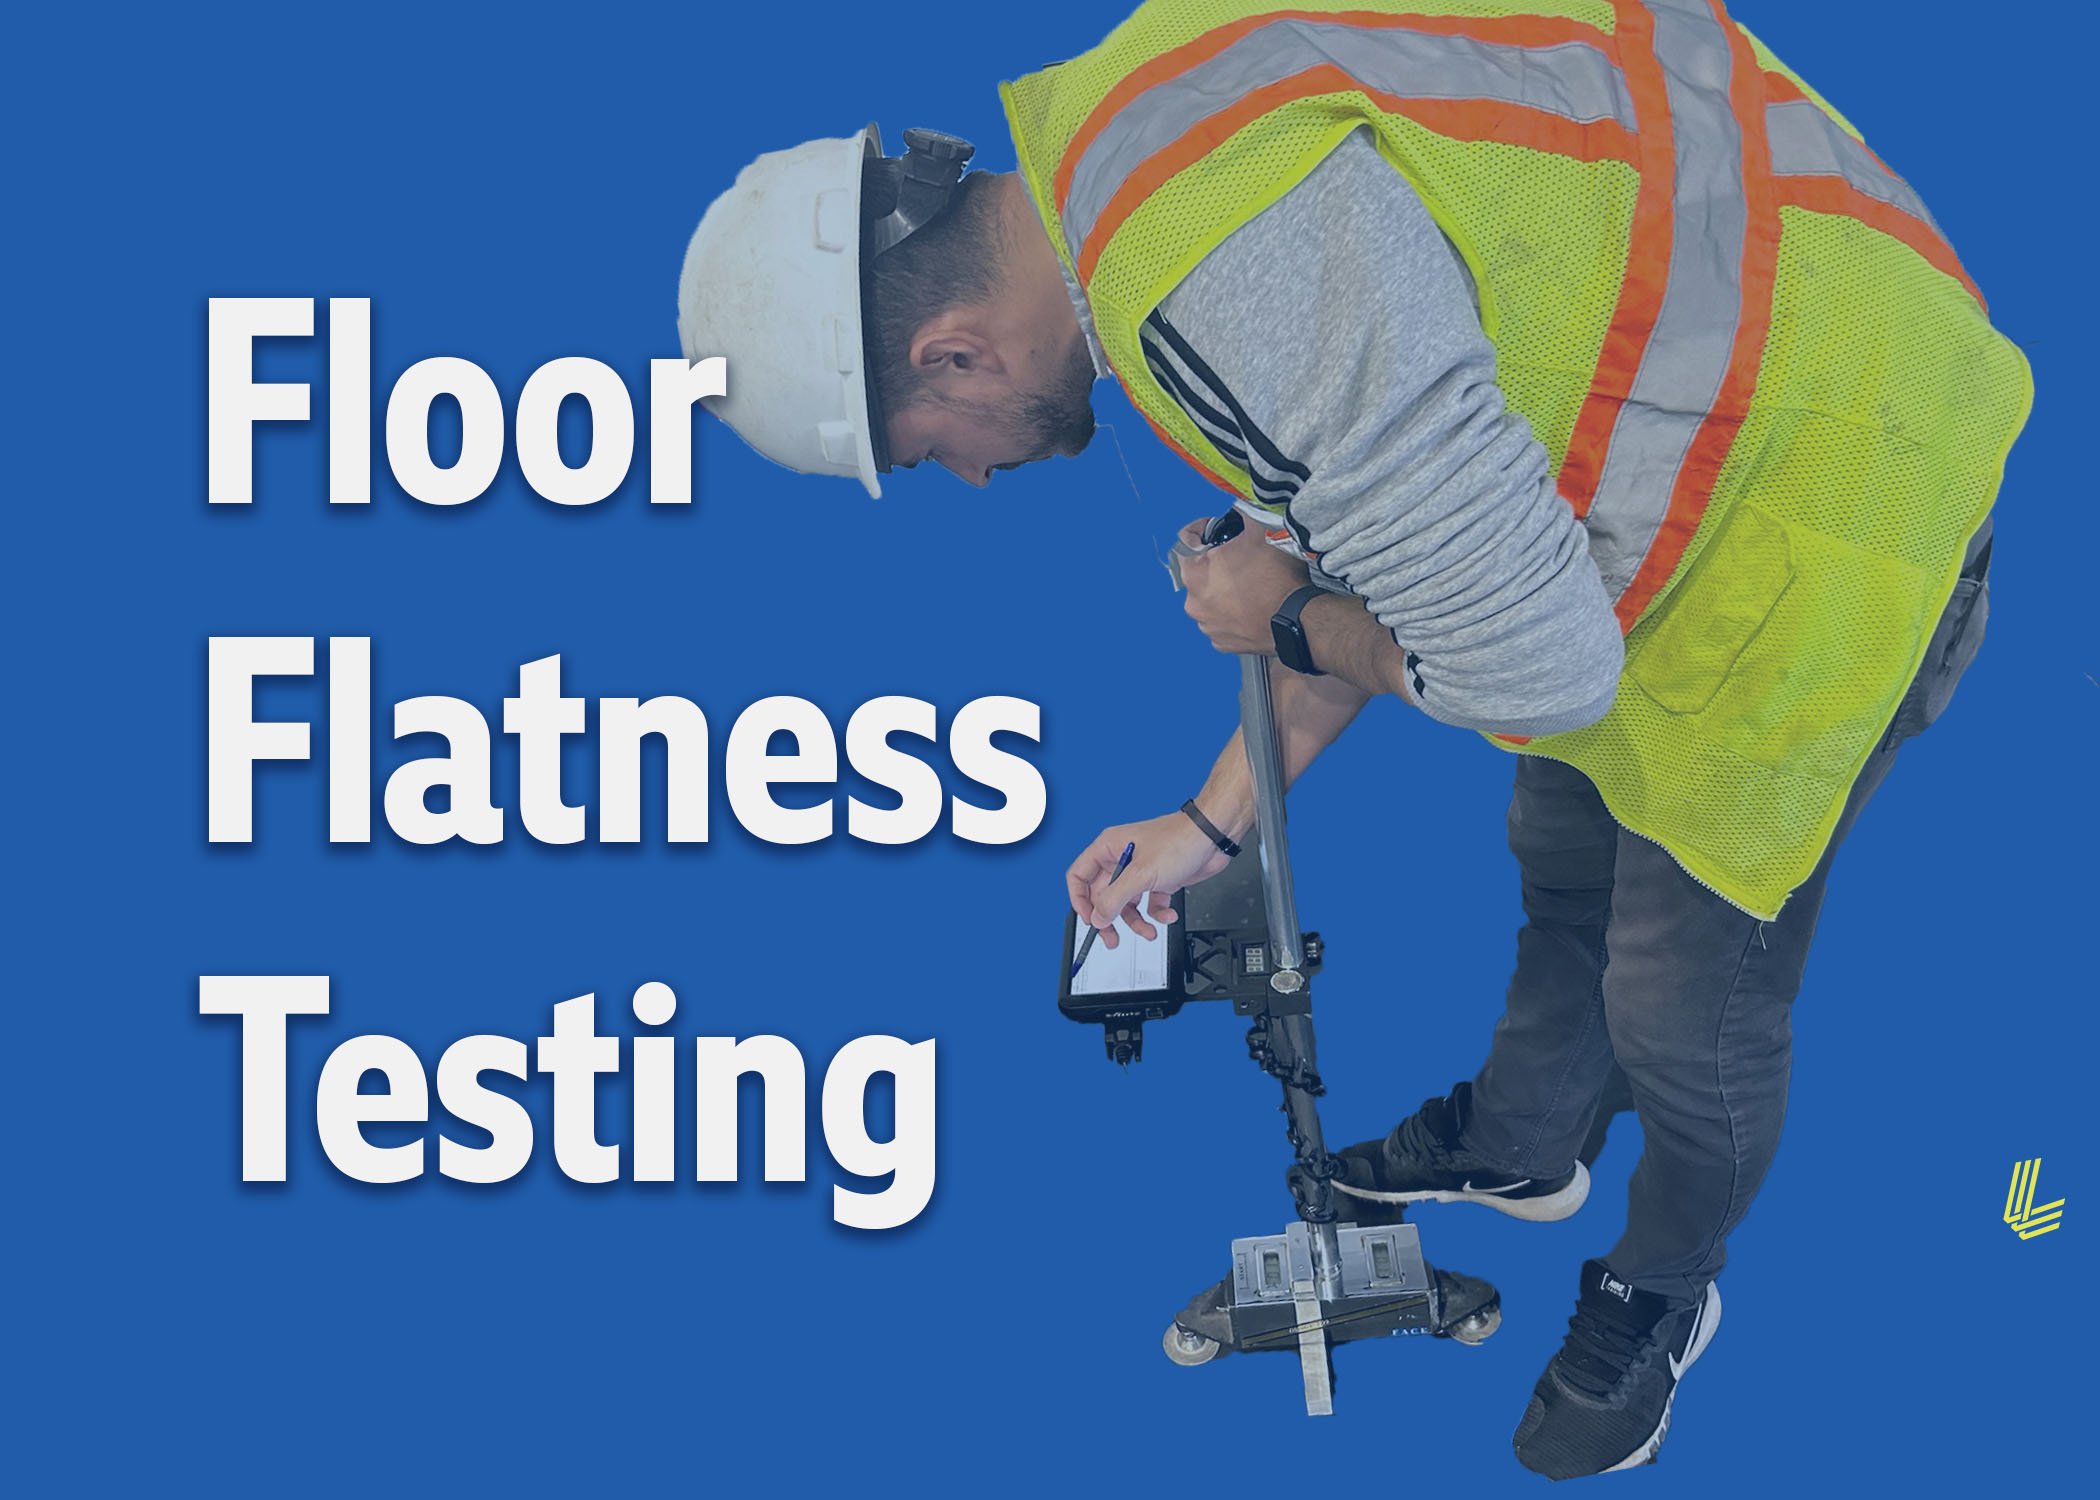 graphic for floor flatness testing